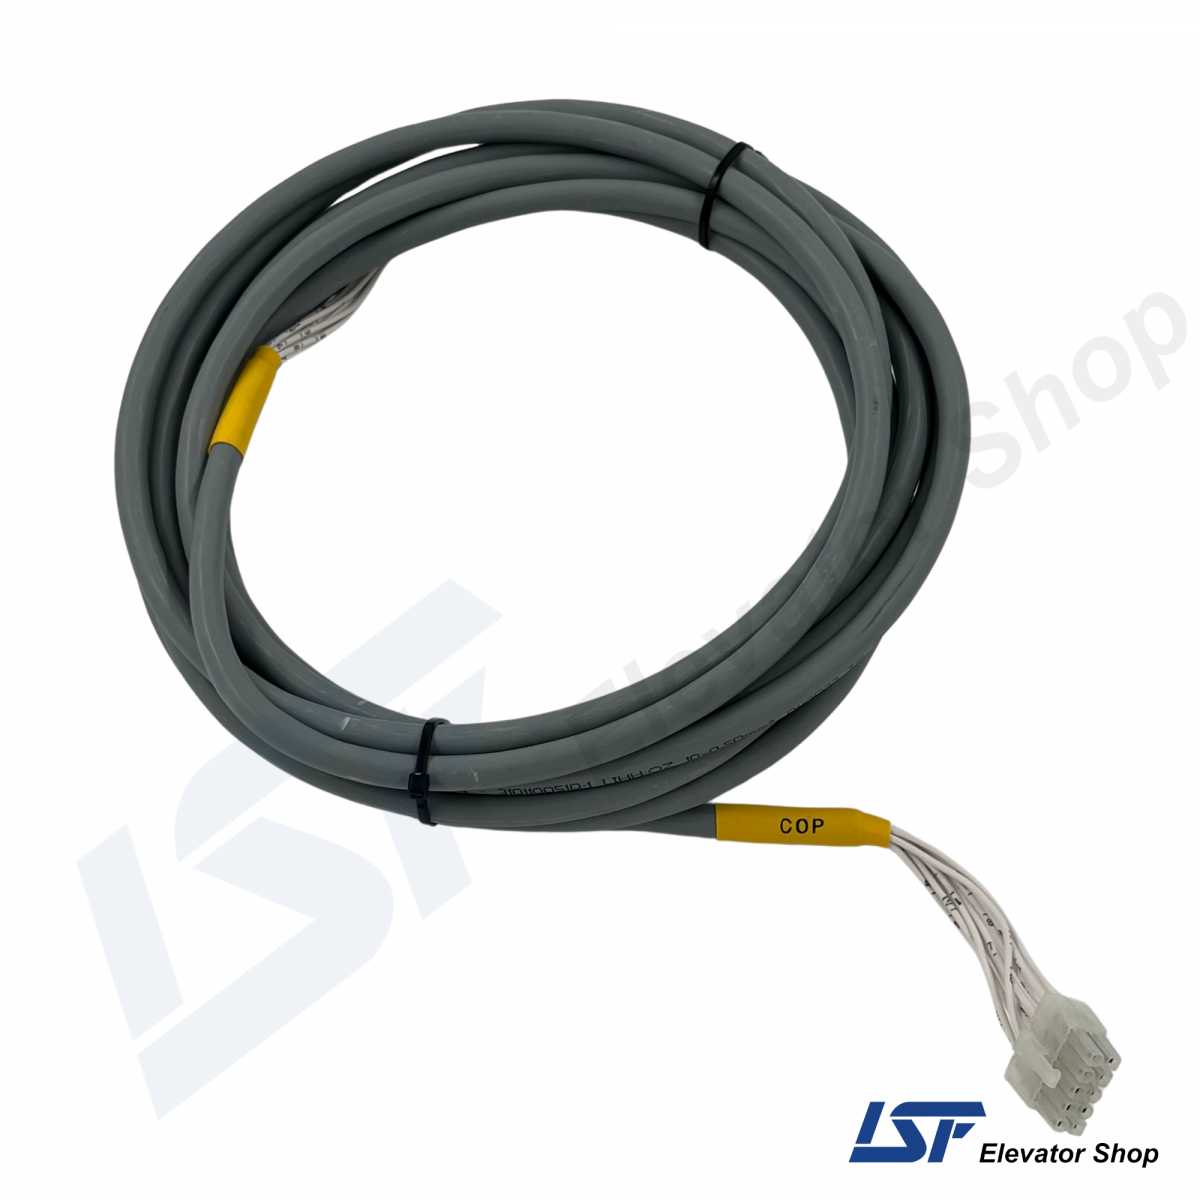 KBL-COP Arkel Cable 5m. for Elevator Systems (2)